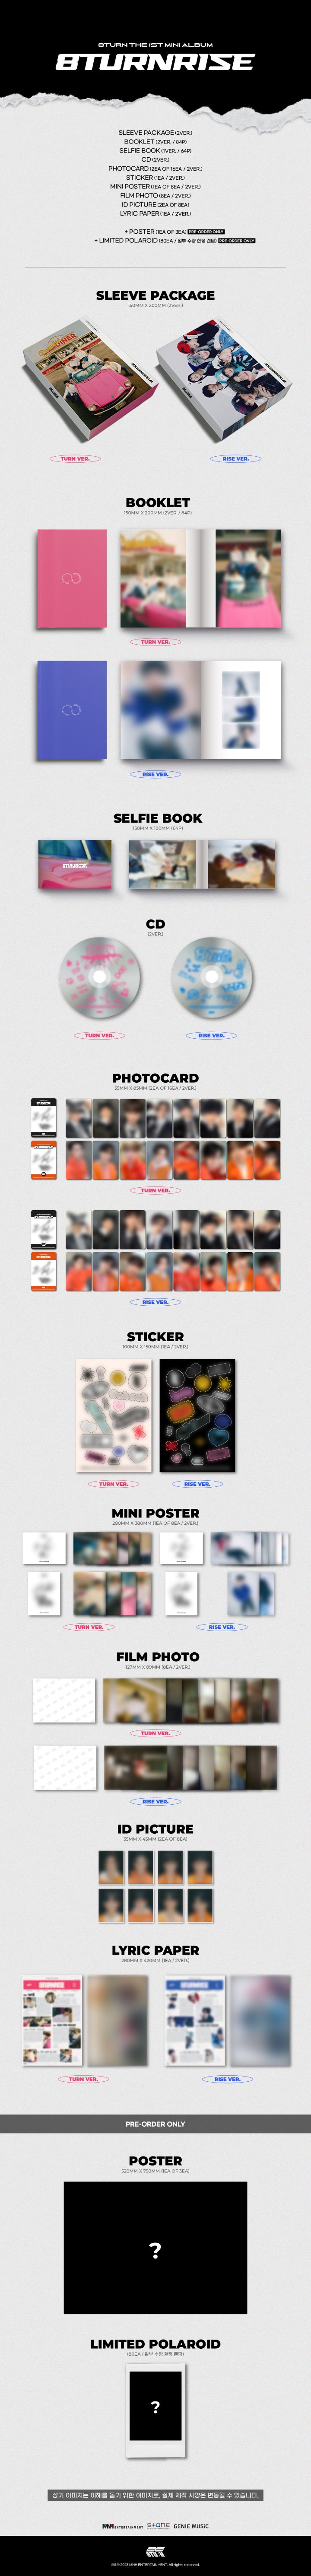 1 CD
1 Booklet (84 pages)
1 Selfie Book (64 pages)
2 Photo Cards (random out of 16 types)
1 Sticker
1 Mini Poster (random ...